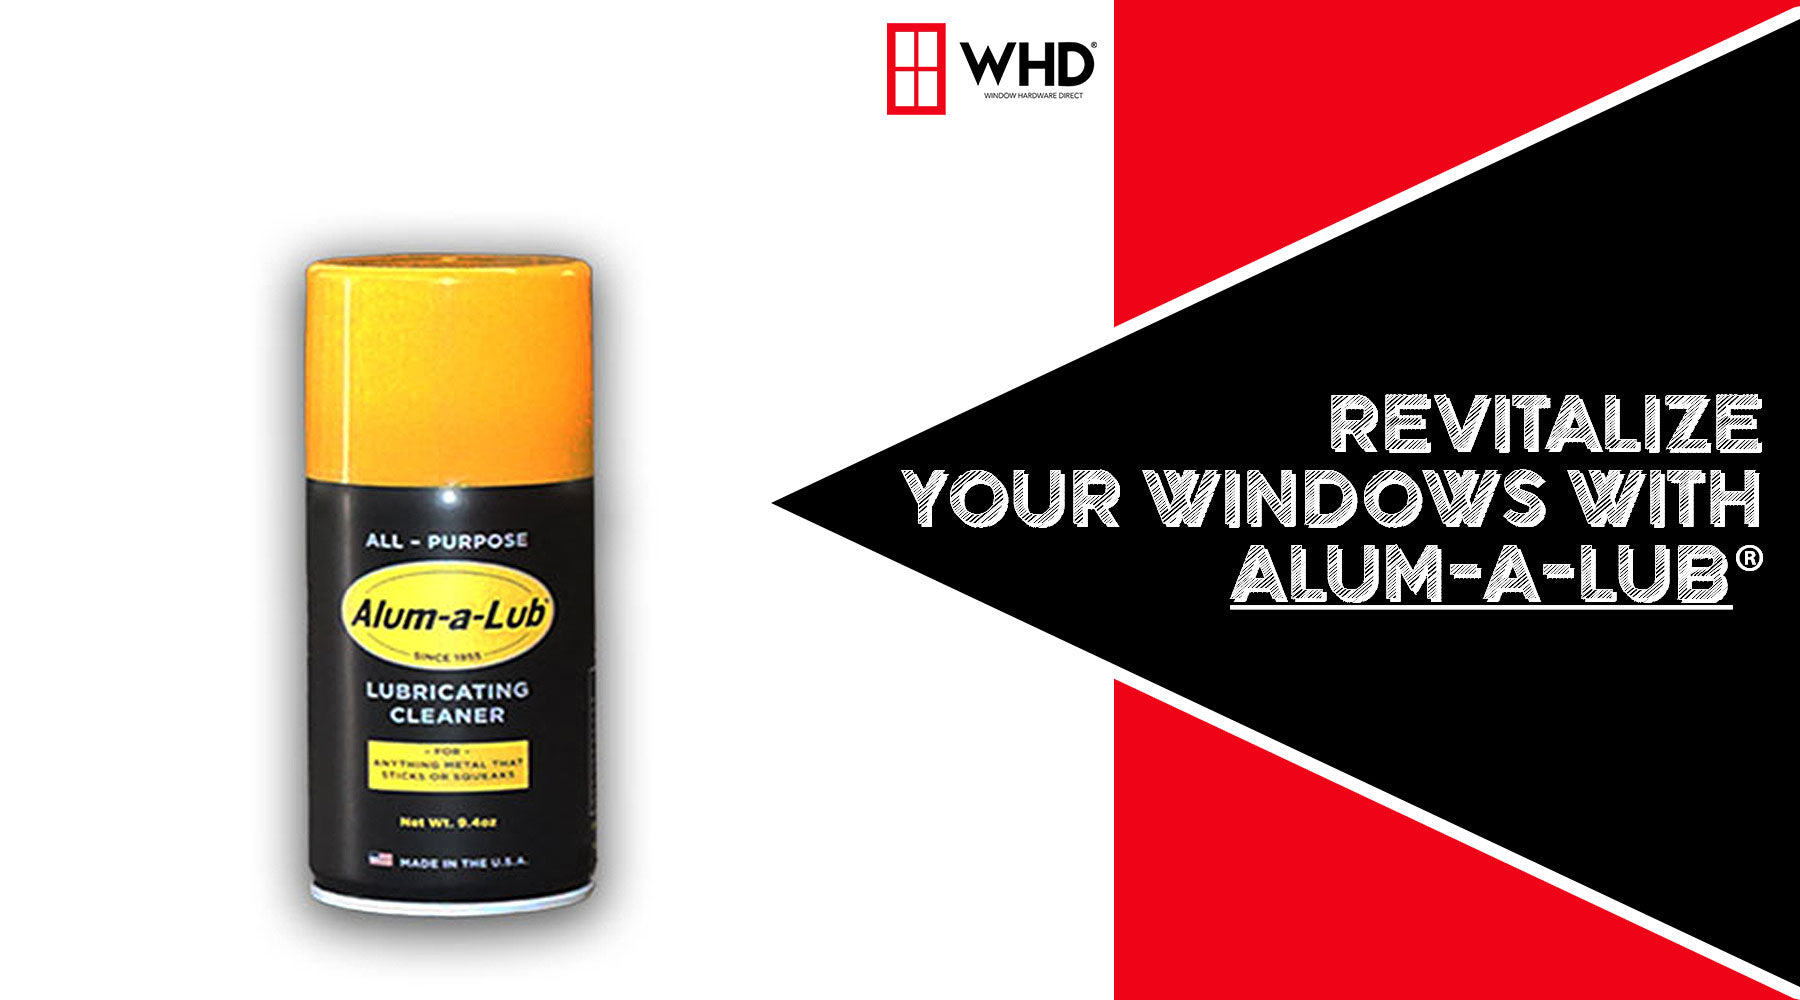 Revitalize Your Windows with Alum-A-Lub All-Purpose Lubricating Cleaner